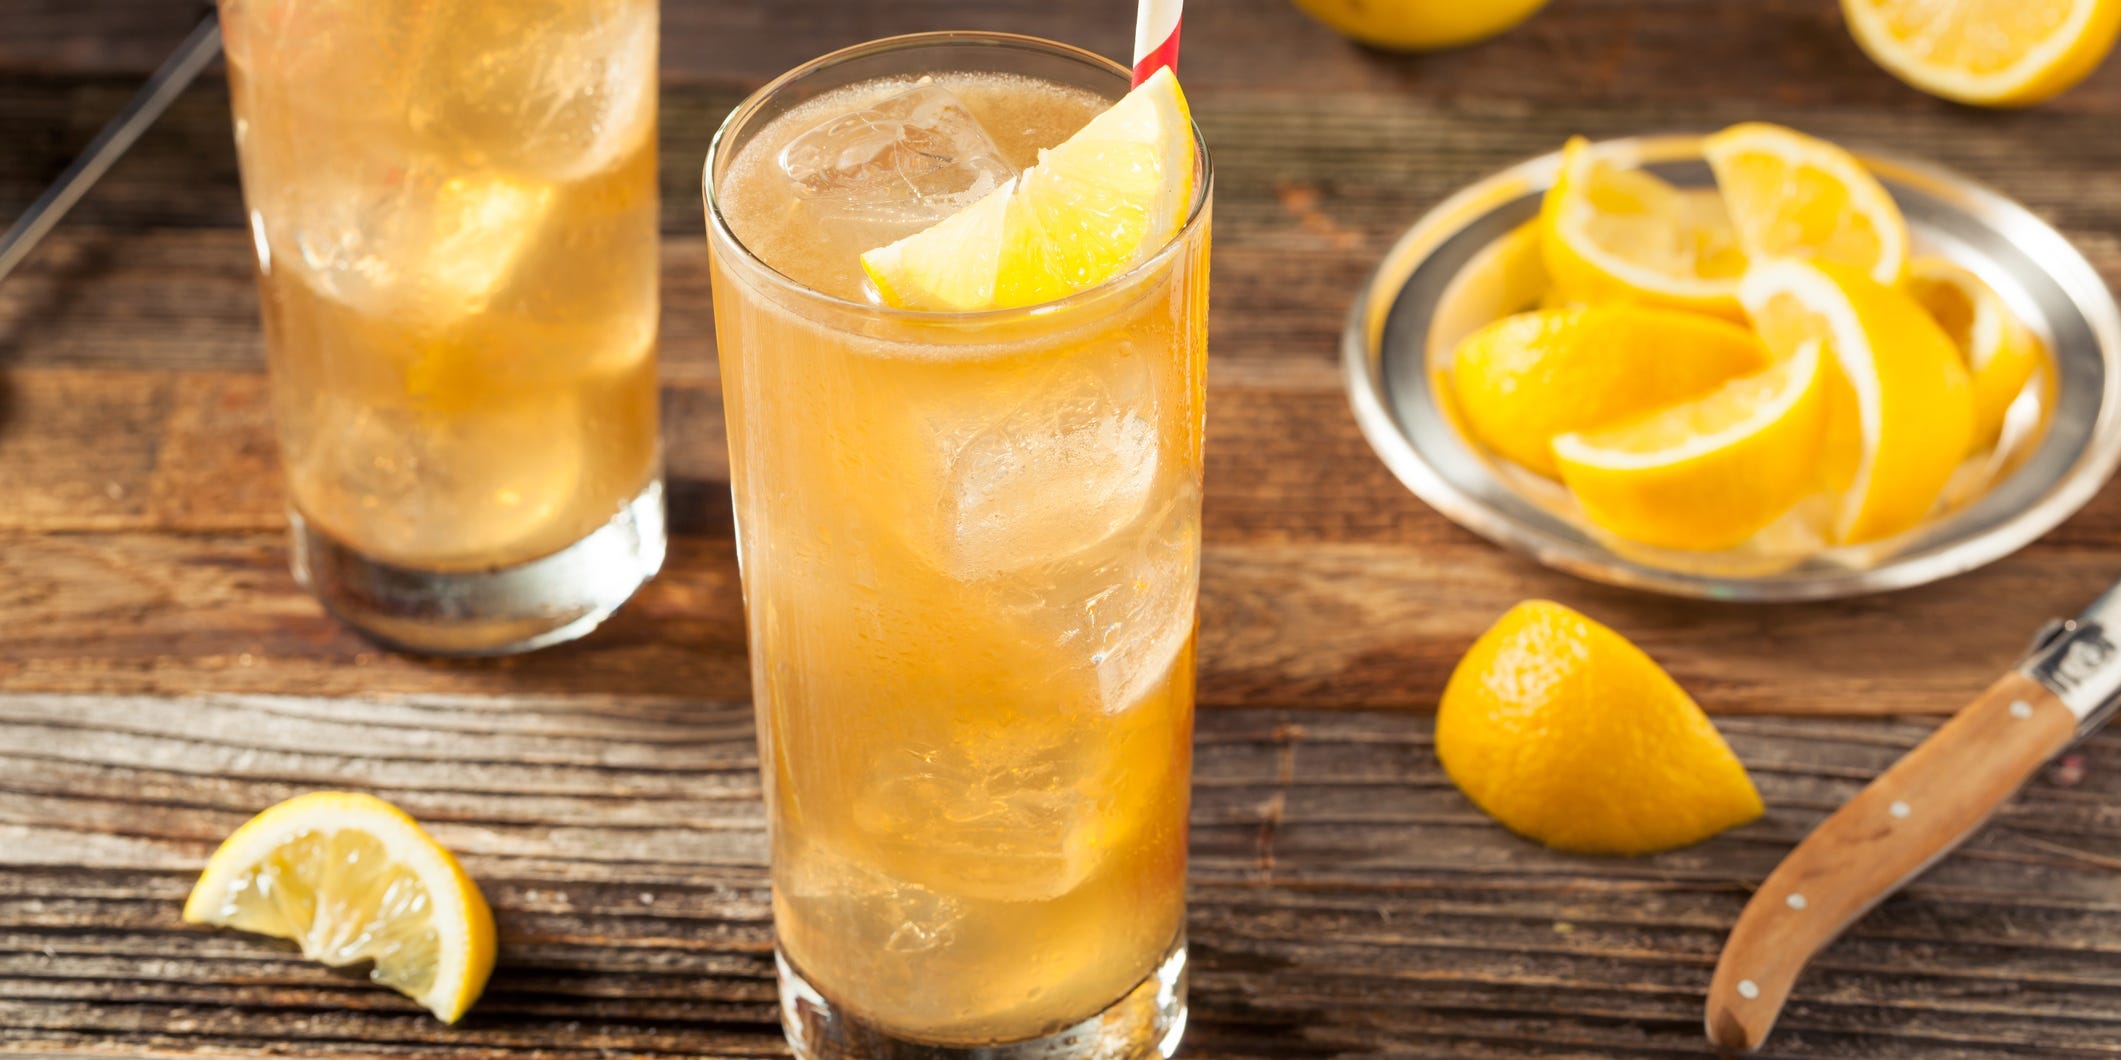 Two Long Island iced tea cocktails garnished with lemon, next to a silver plate of lemon slices